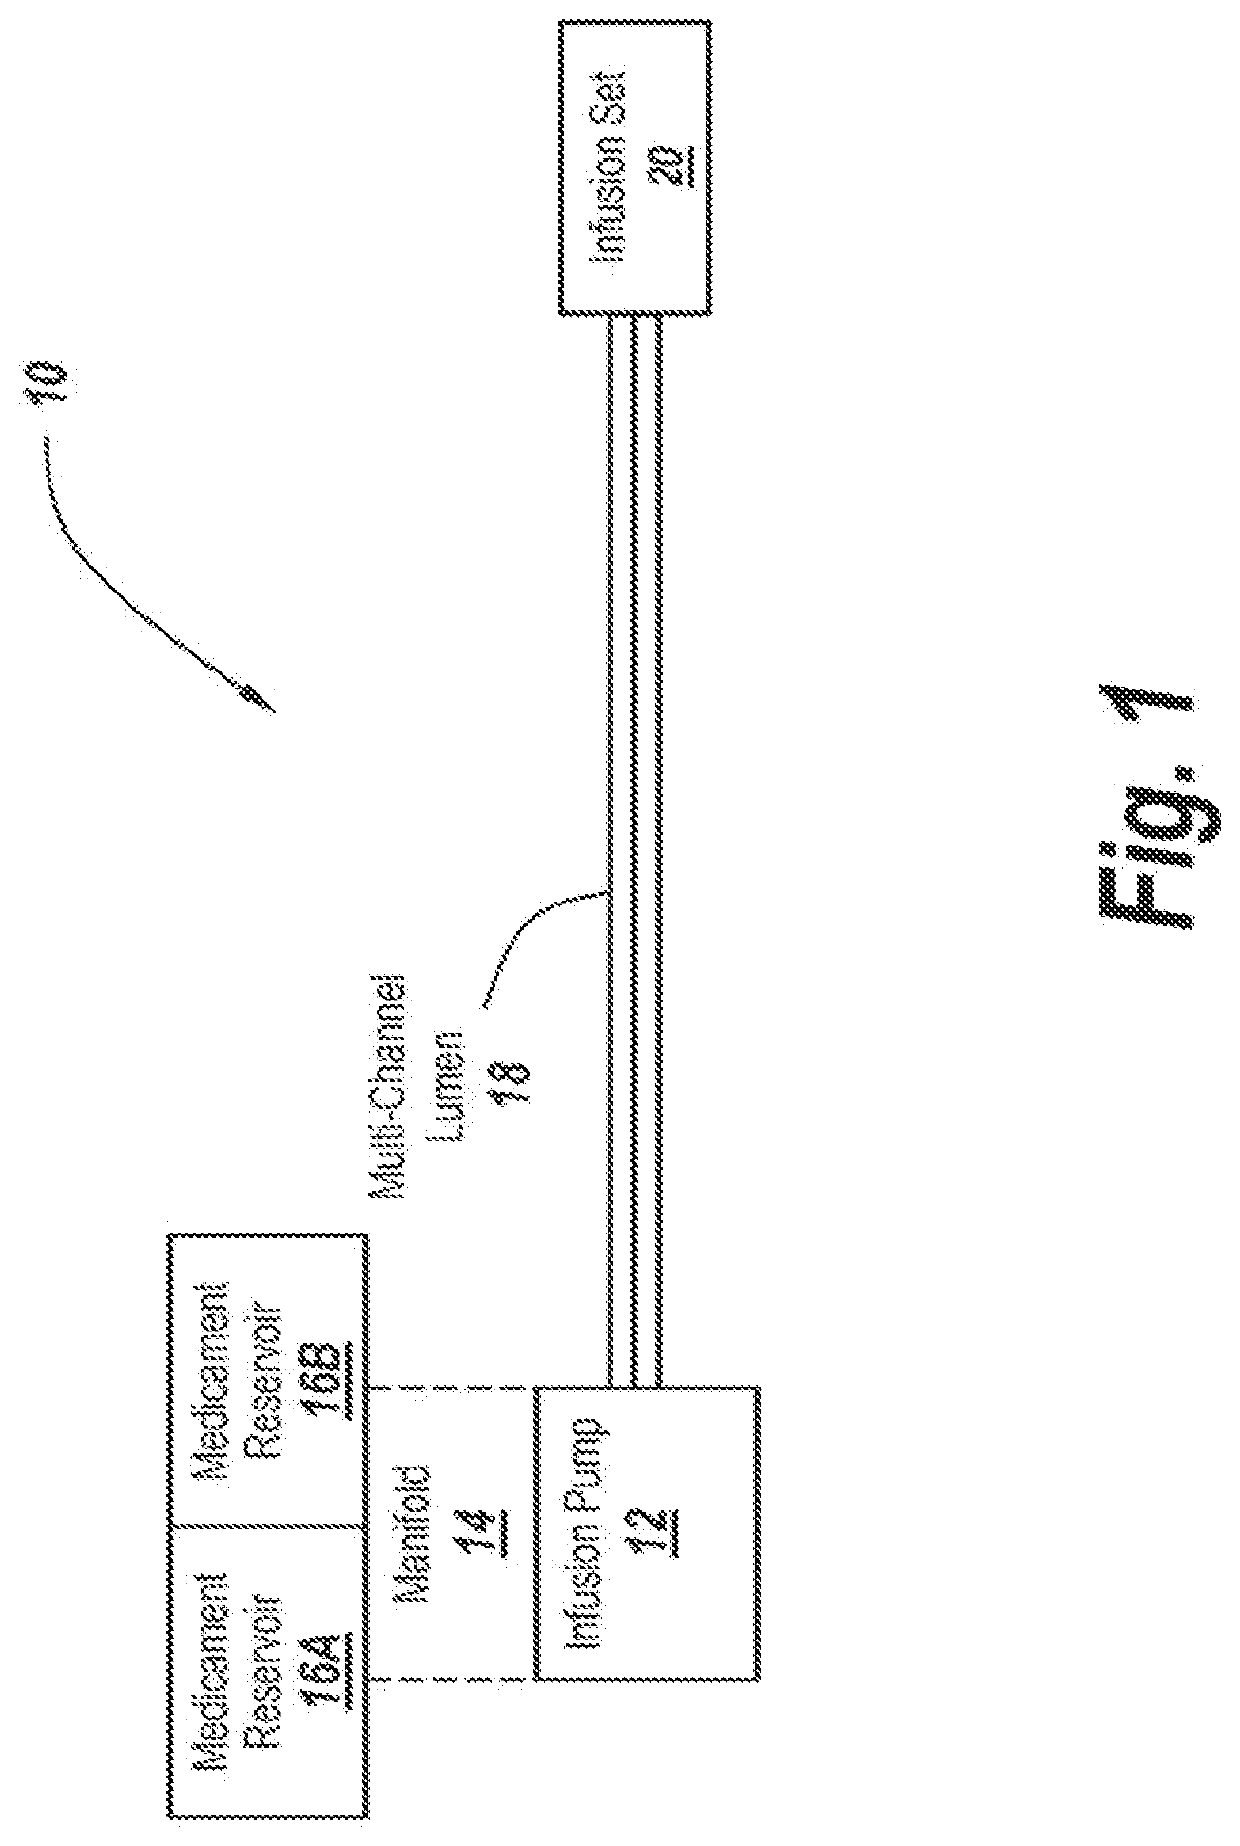 Infusion pump and system for preventing mischanneling of multiple medicaments